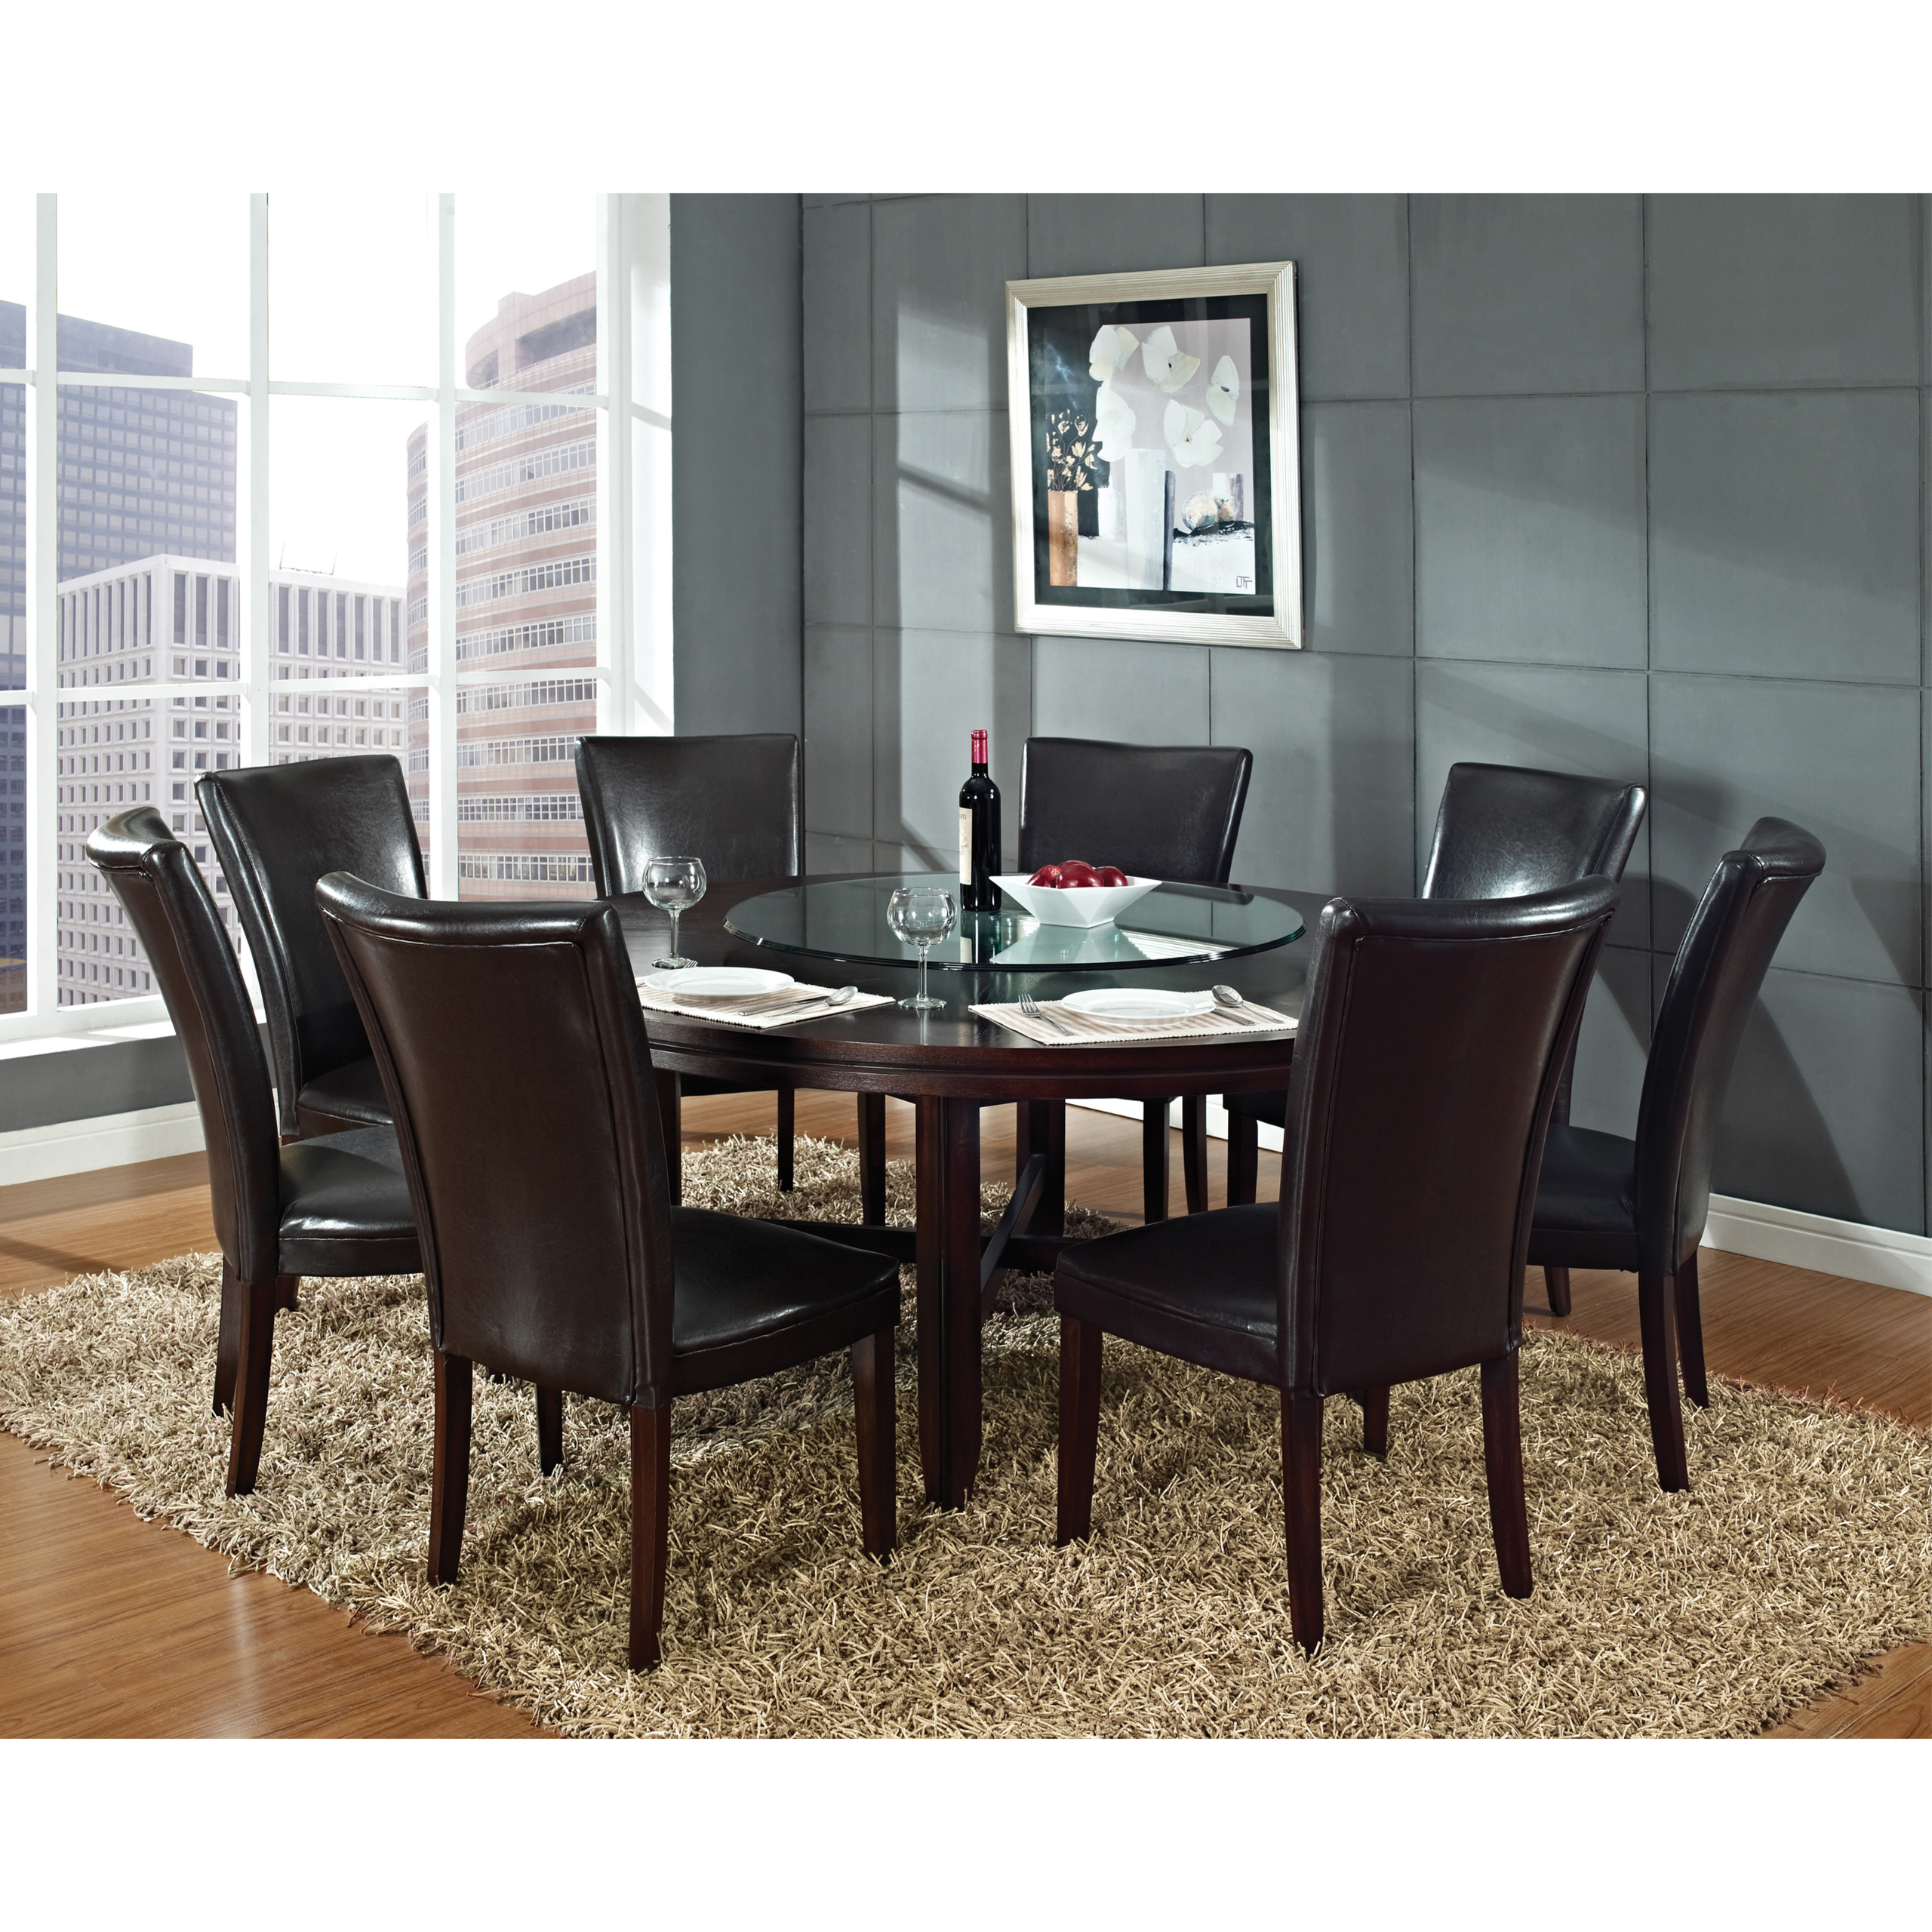 Round Dining Table For 6 Visualhunt, 6 Seater Round Glass Dining Table And Chairs